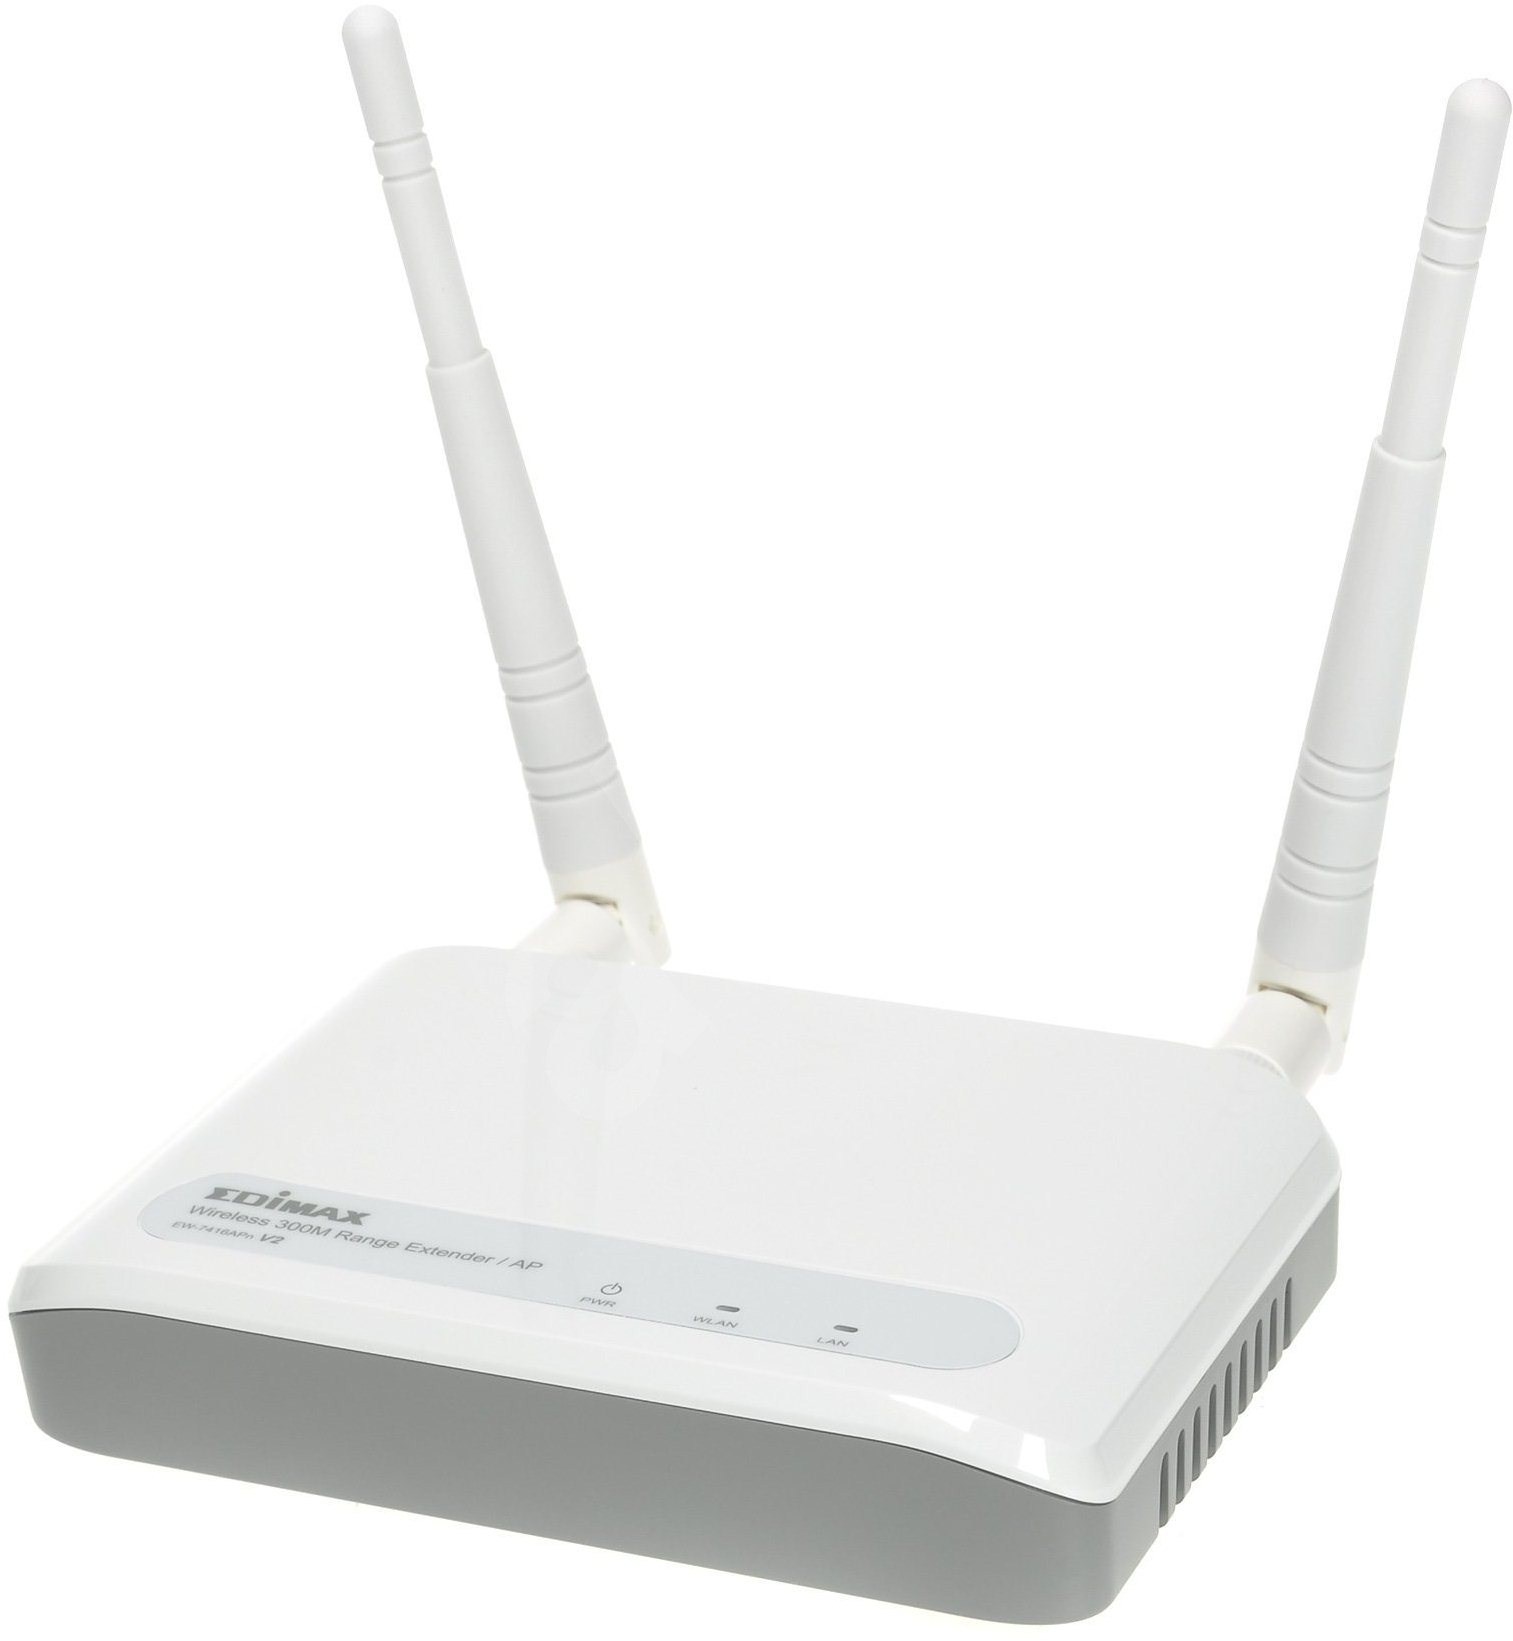 Edimax Wireless Routers N150 N150 Multi Function Wi Fi Router Br Three Essential Networking Tools In One